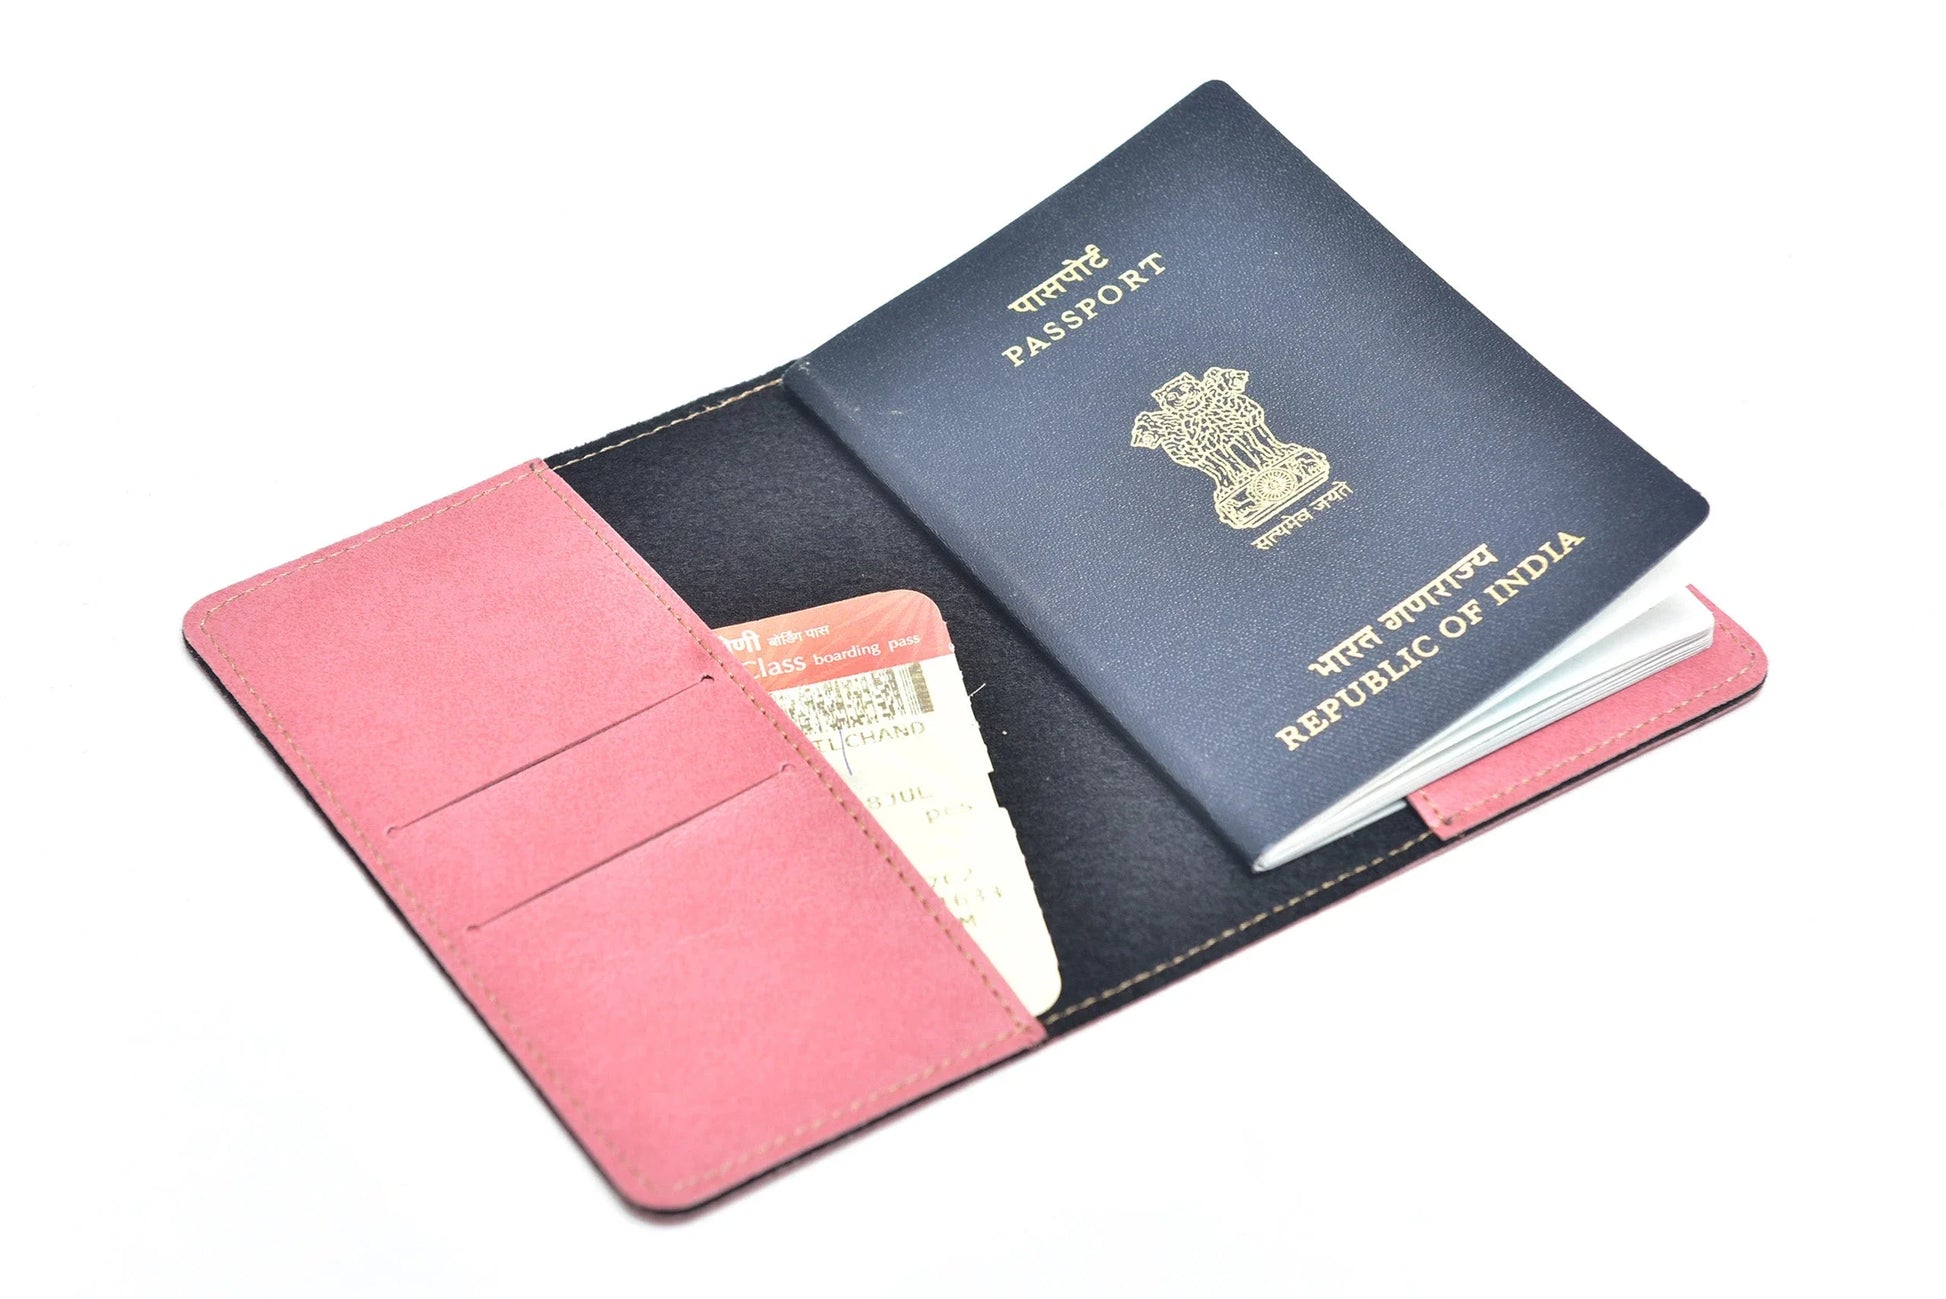 Inside or open view of peach passport